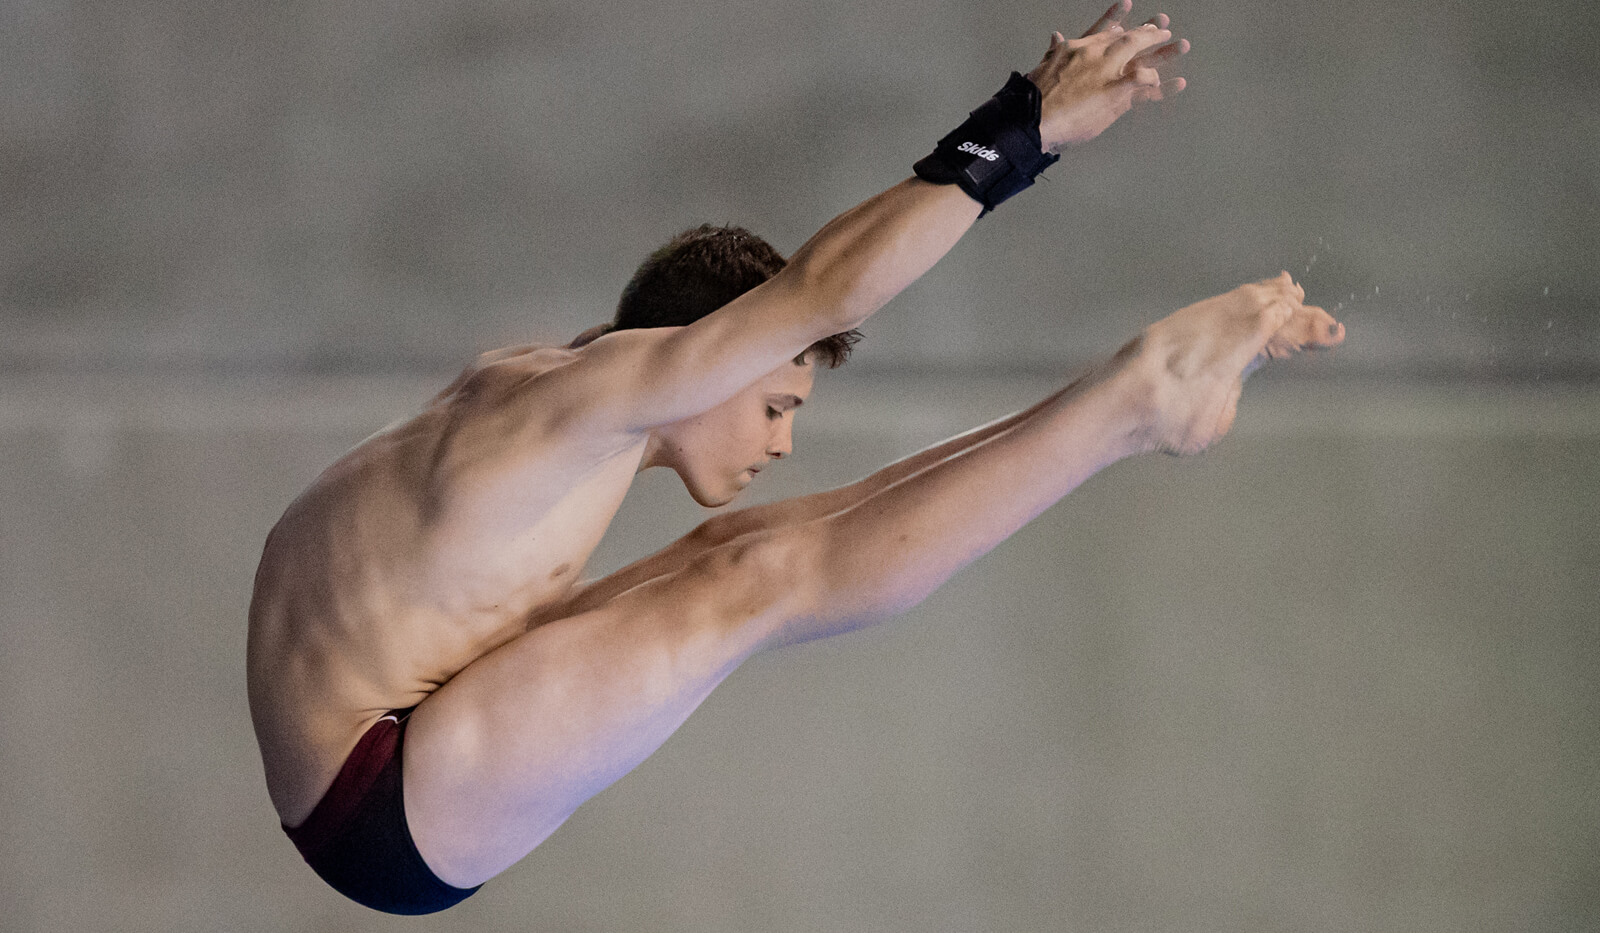 Montreal: Benjamin Tessier scores perfect 10 to win gold